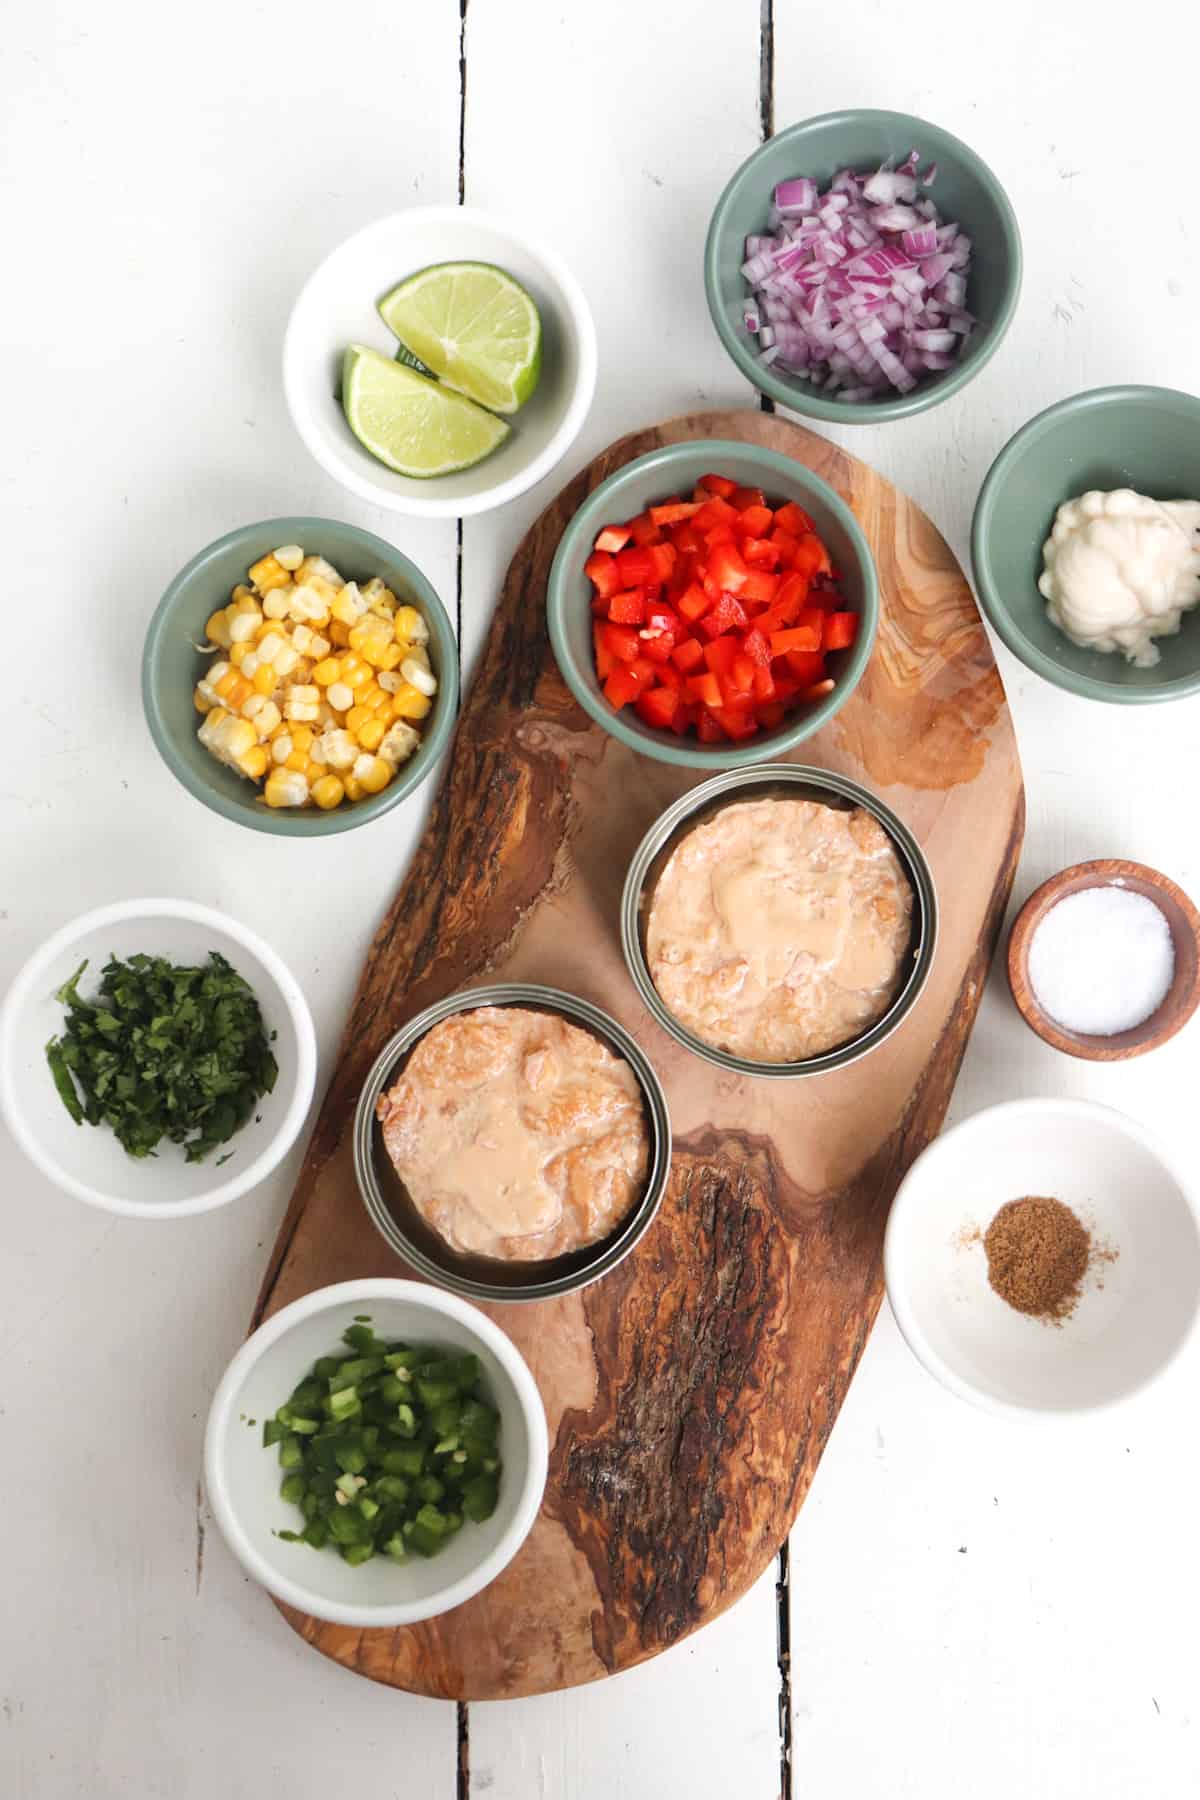 ingredients for mexican tuna salad on a wooden background.